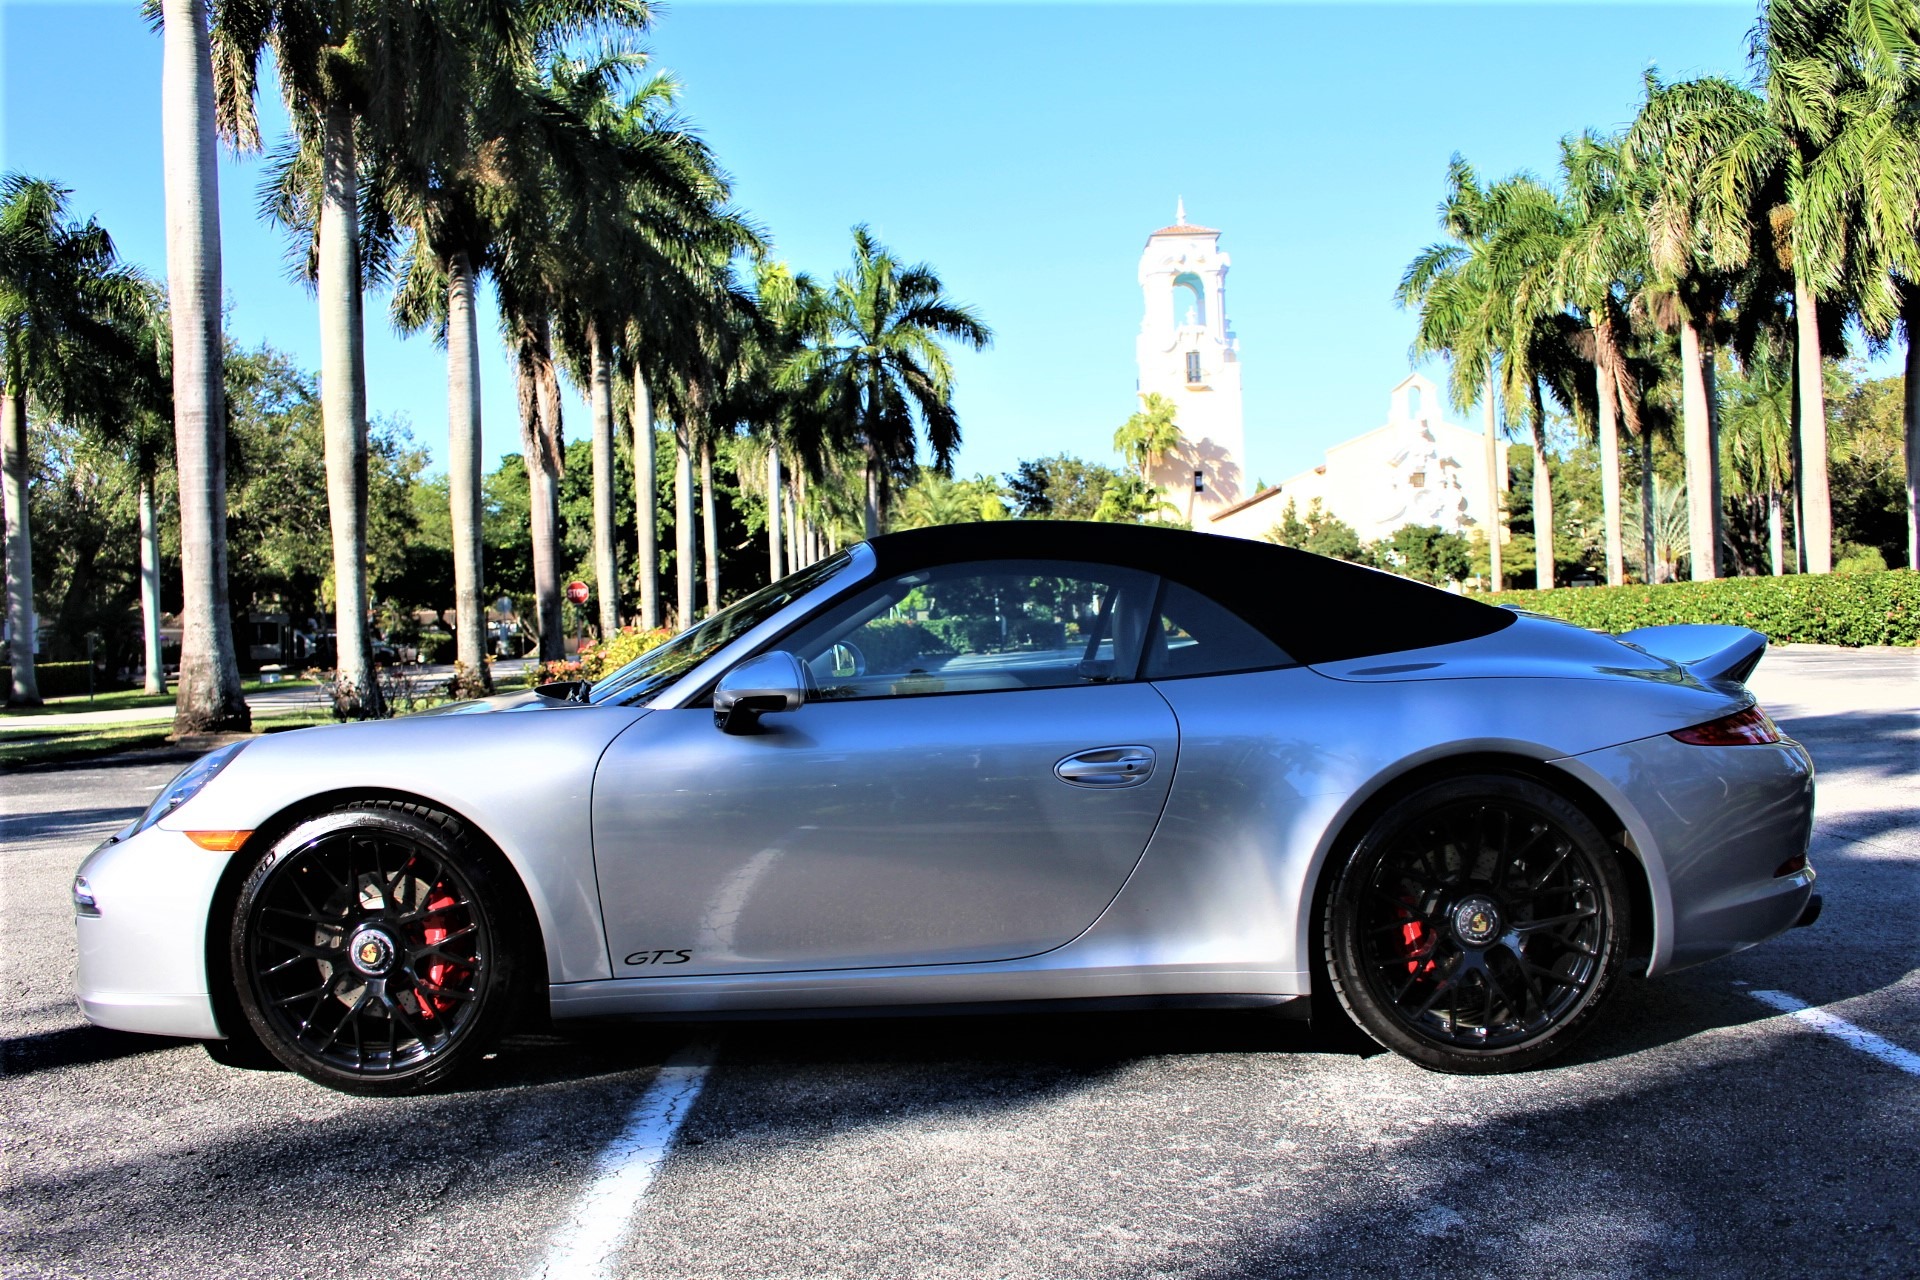 Used 2016 Porsche 911 Carrera GTS for sale Sold at The Gables Sports Cars in Miami FL 33146 3